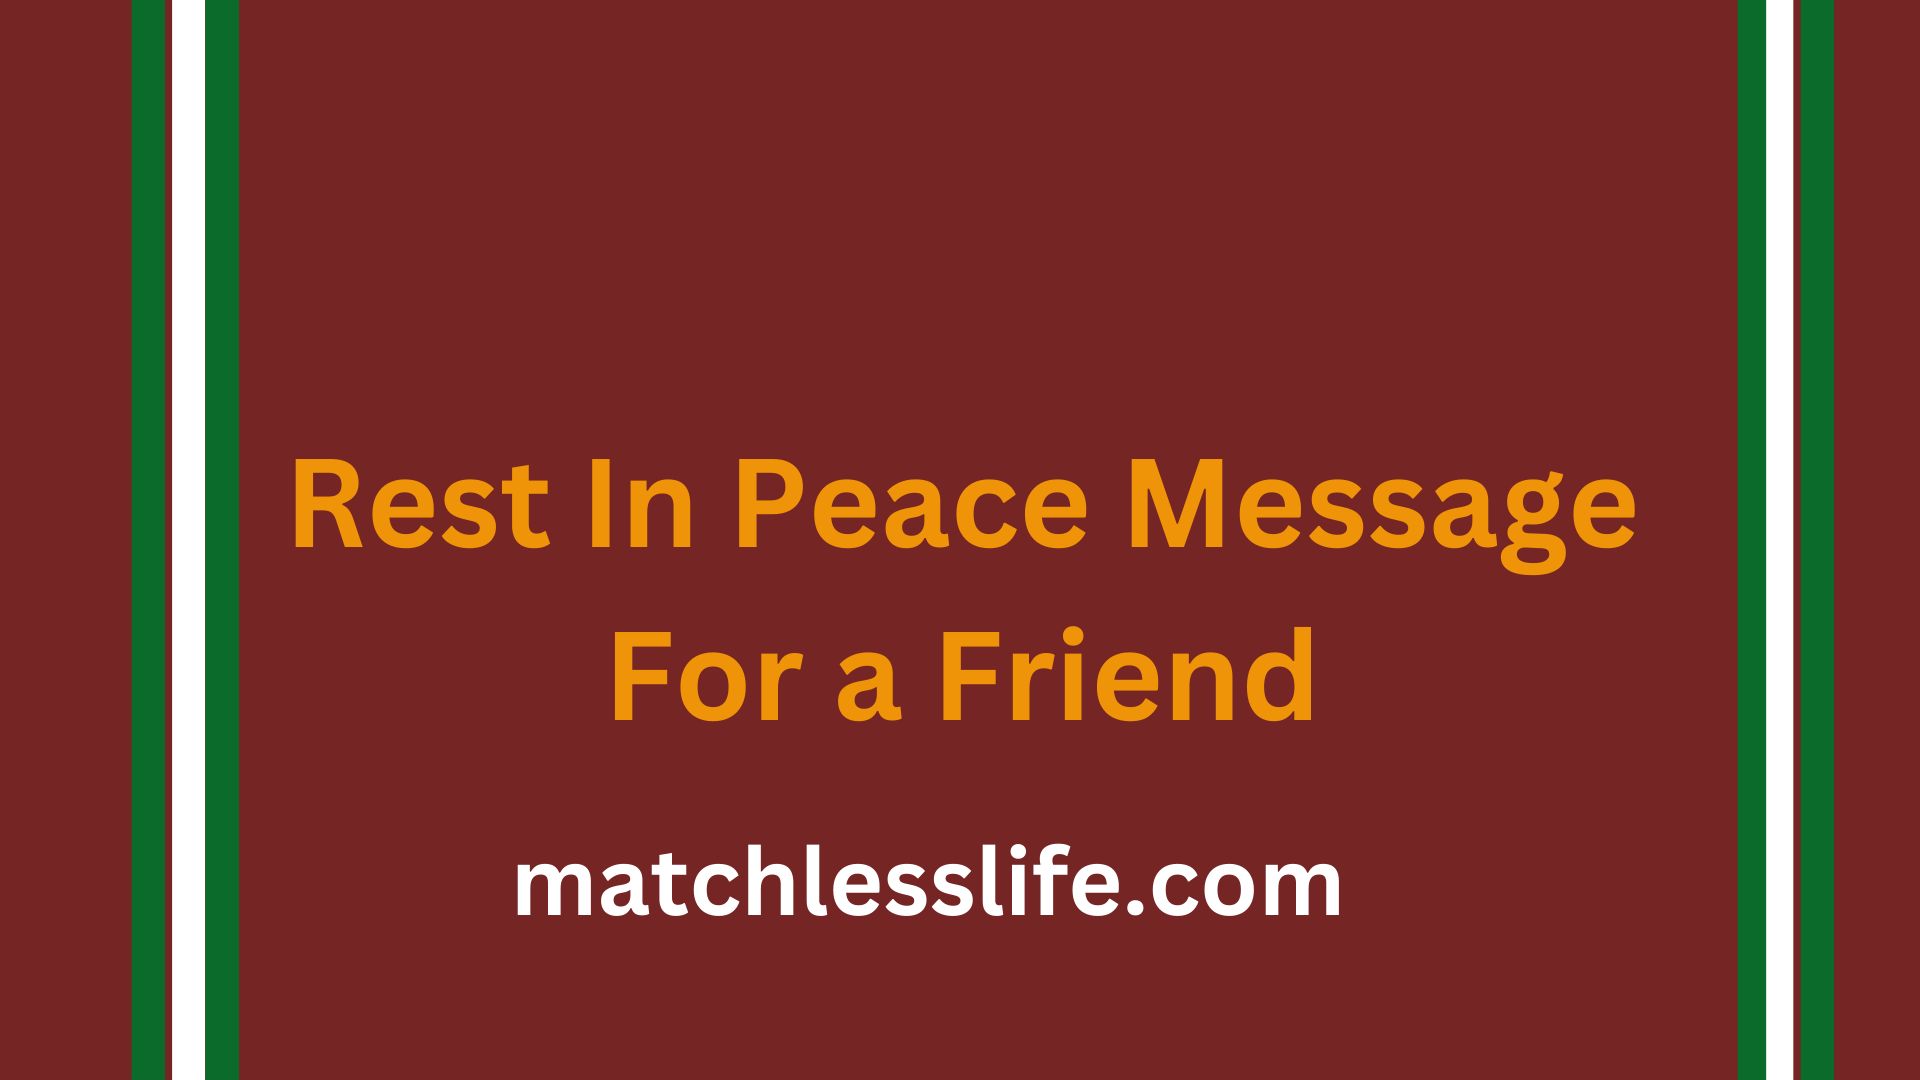 Rest In Peace Message For a Friend